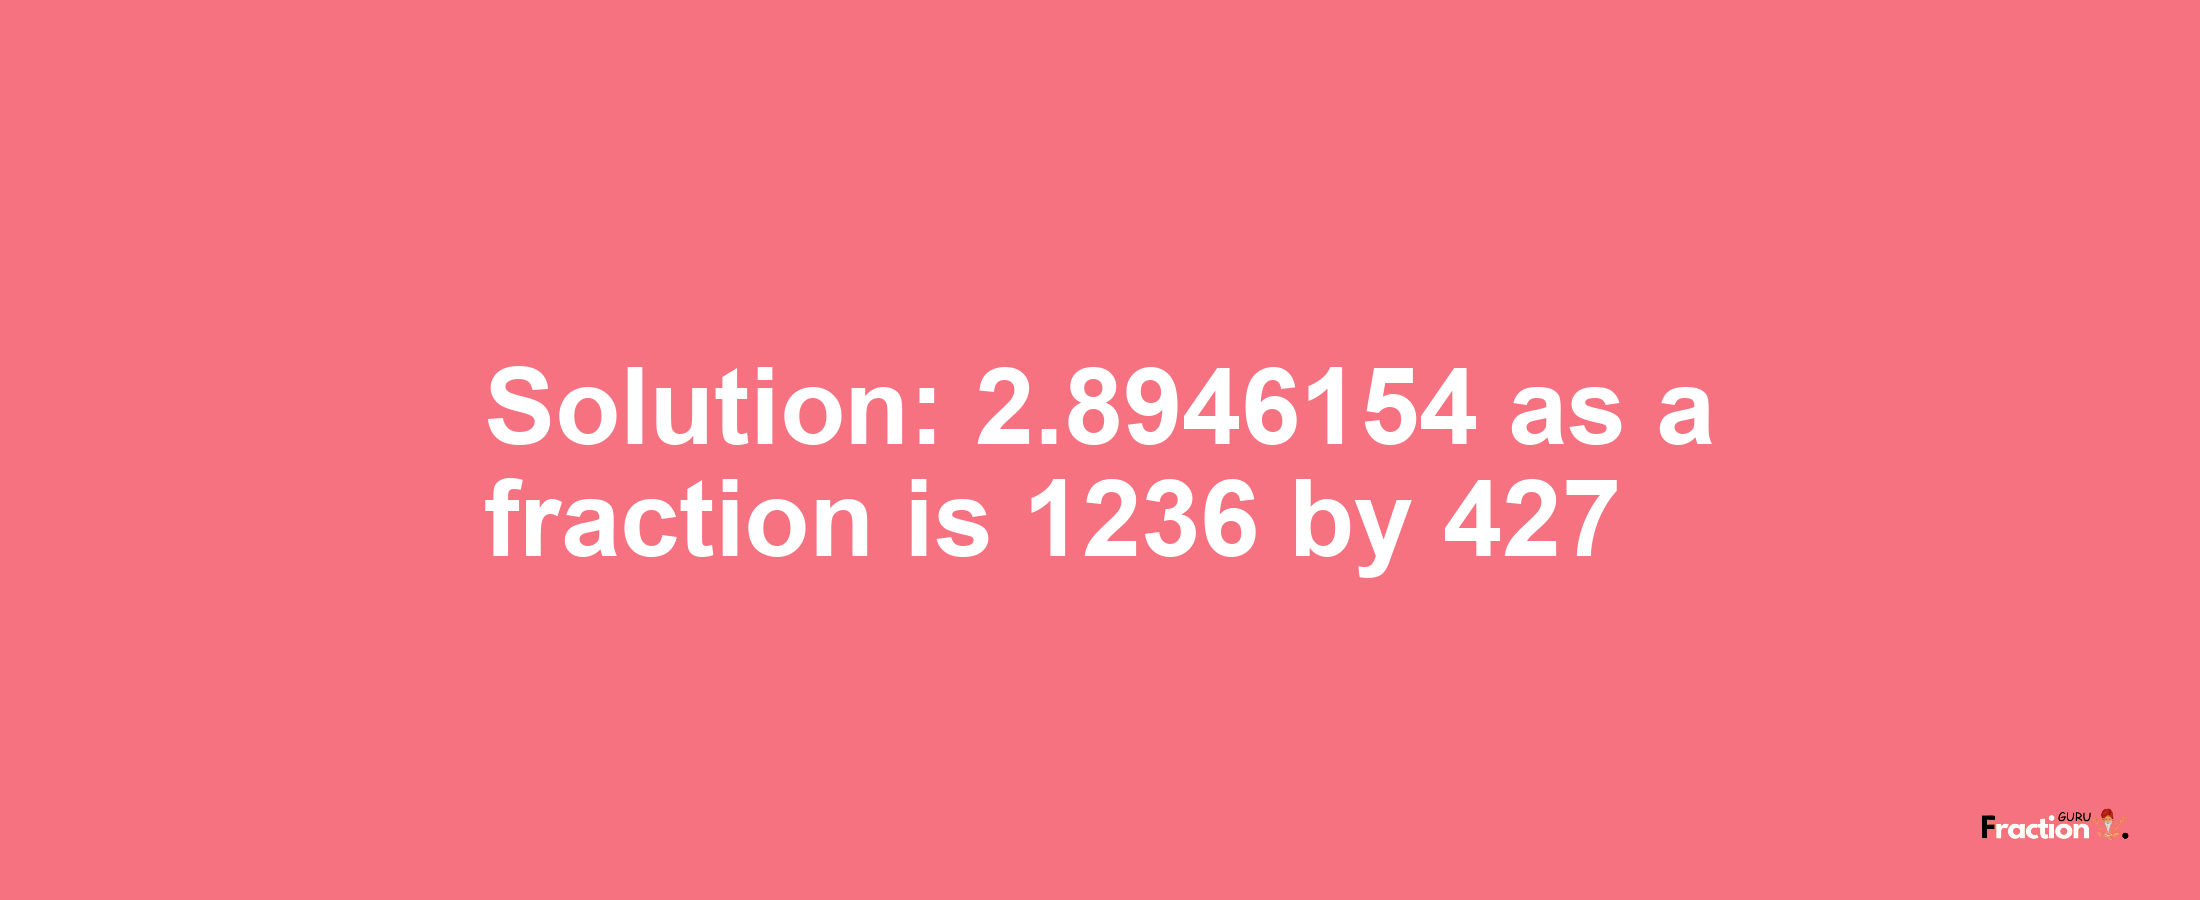 Solution:2.8946154 as a fraction is 1236/427